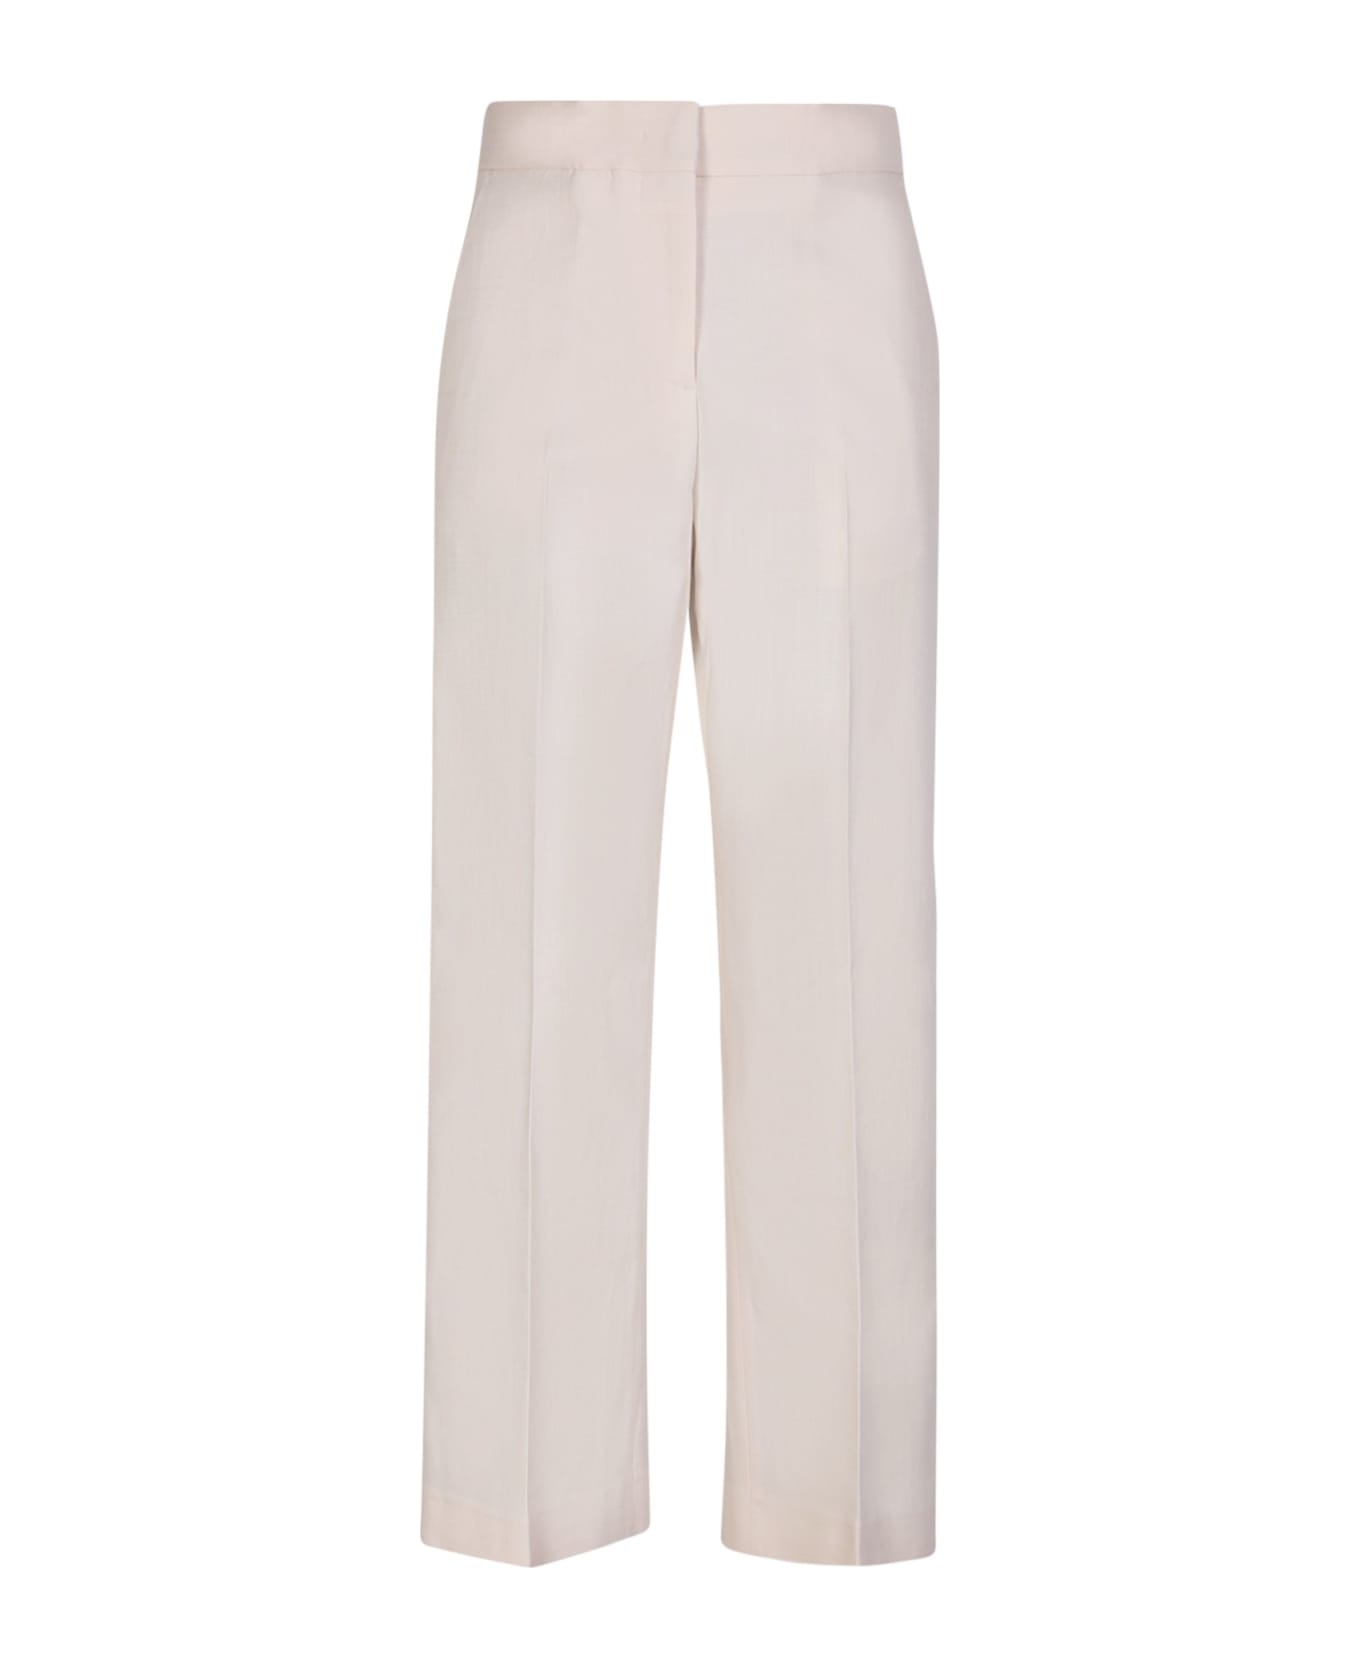 MSGM Cropped Ivory Trousers - White